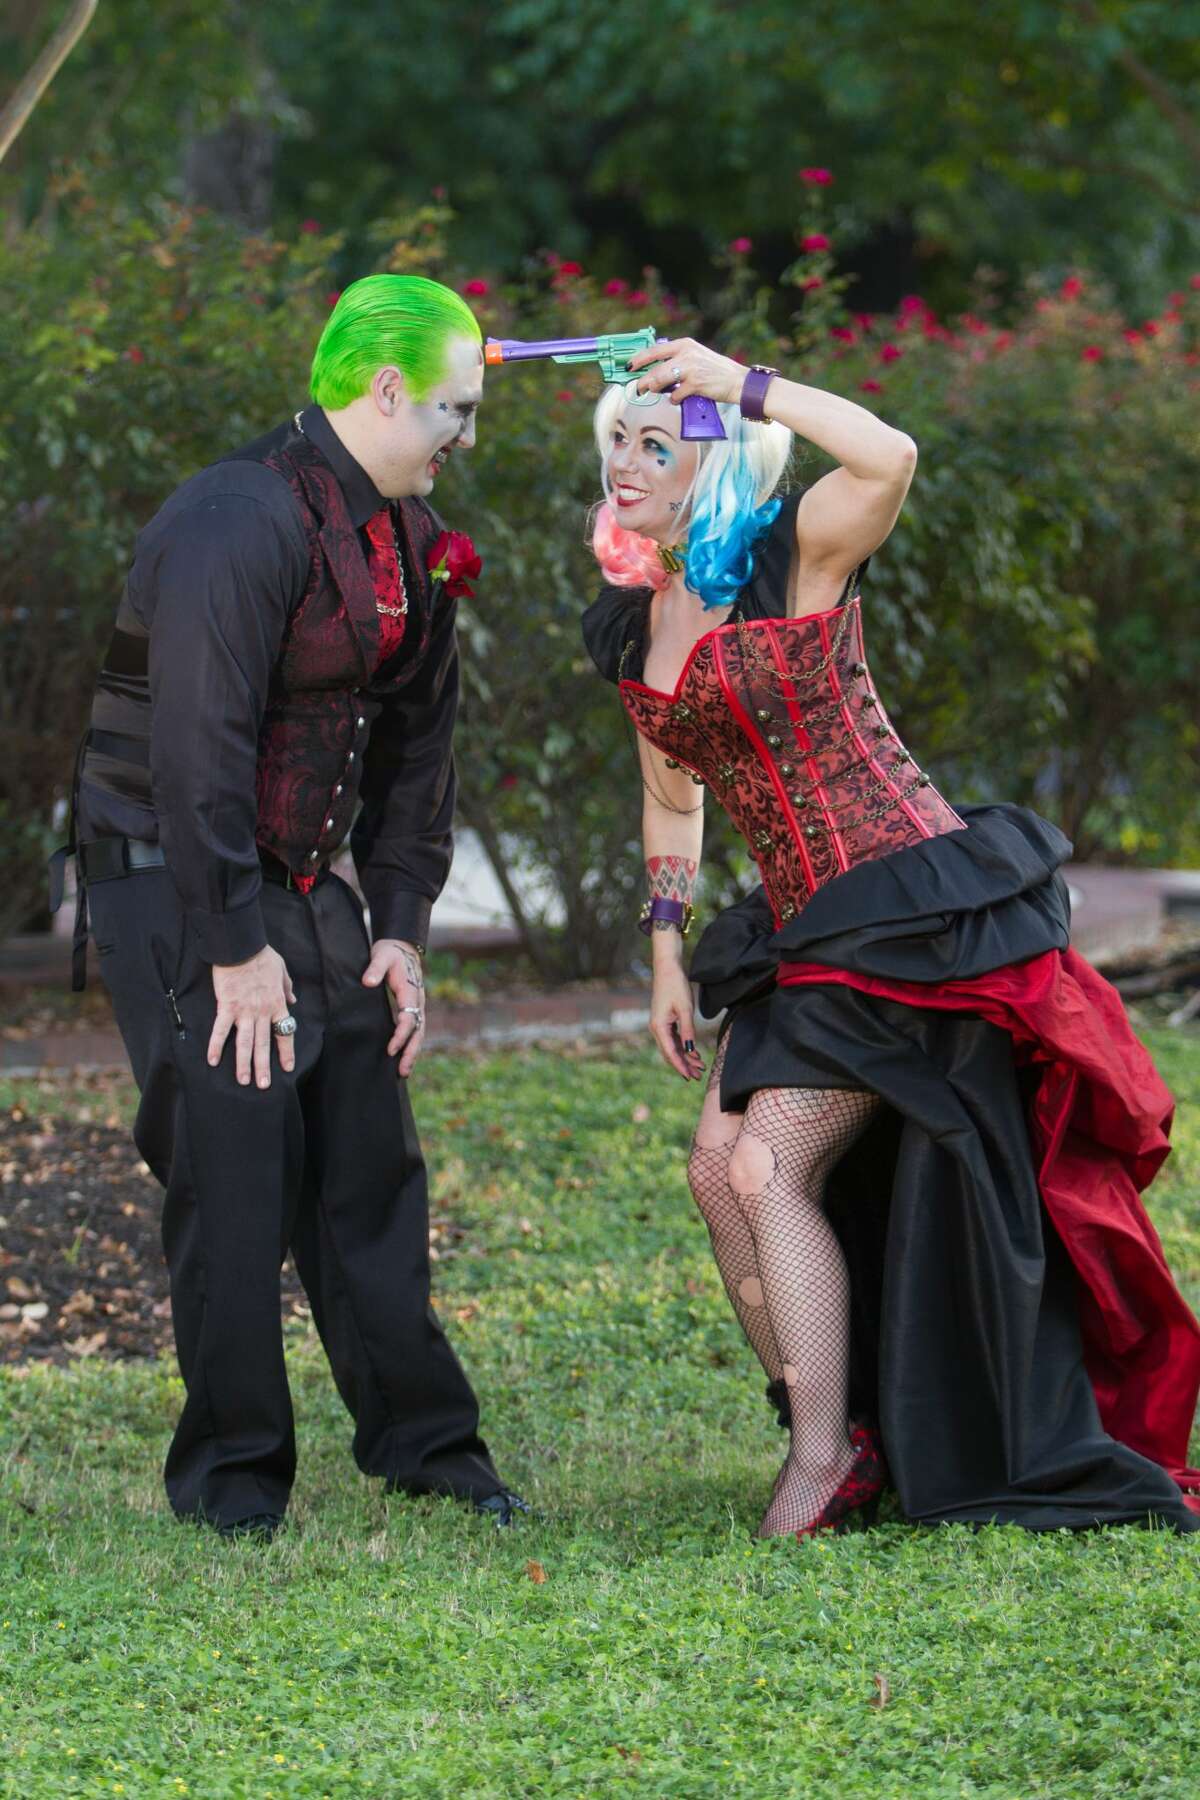 S A Couple Solidifies Mad Love With Joker Harley Quinn Themed Wedding